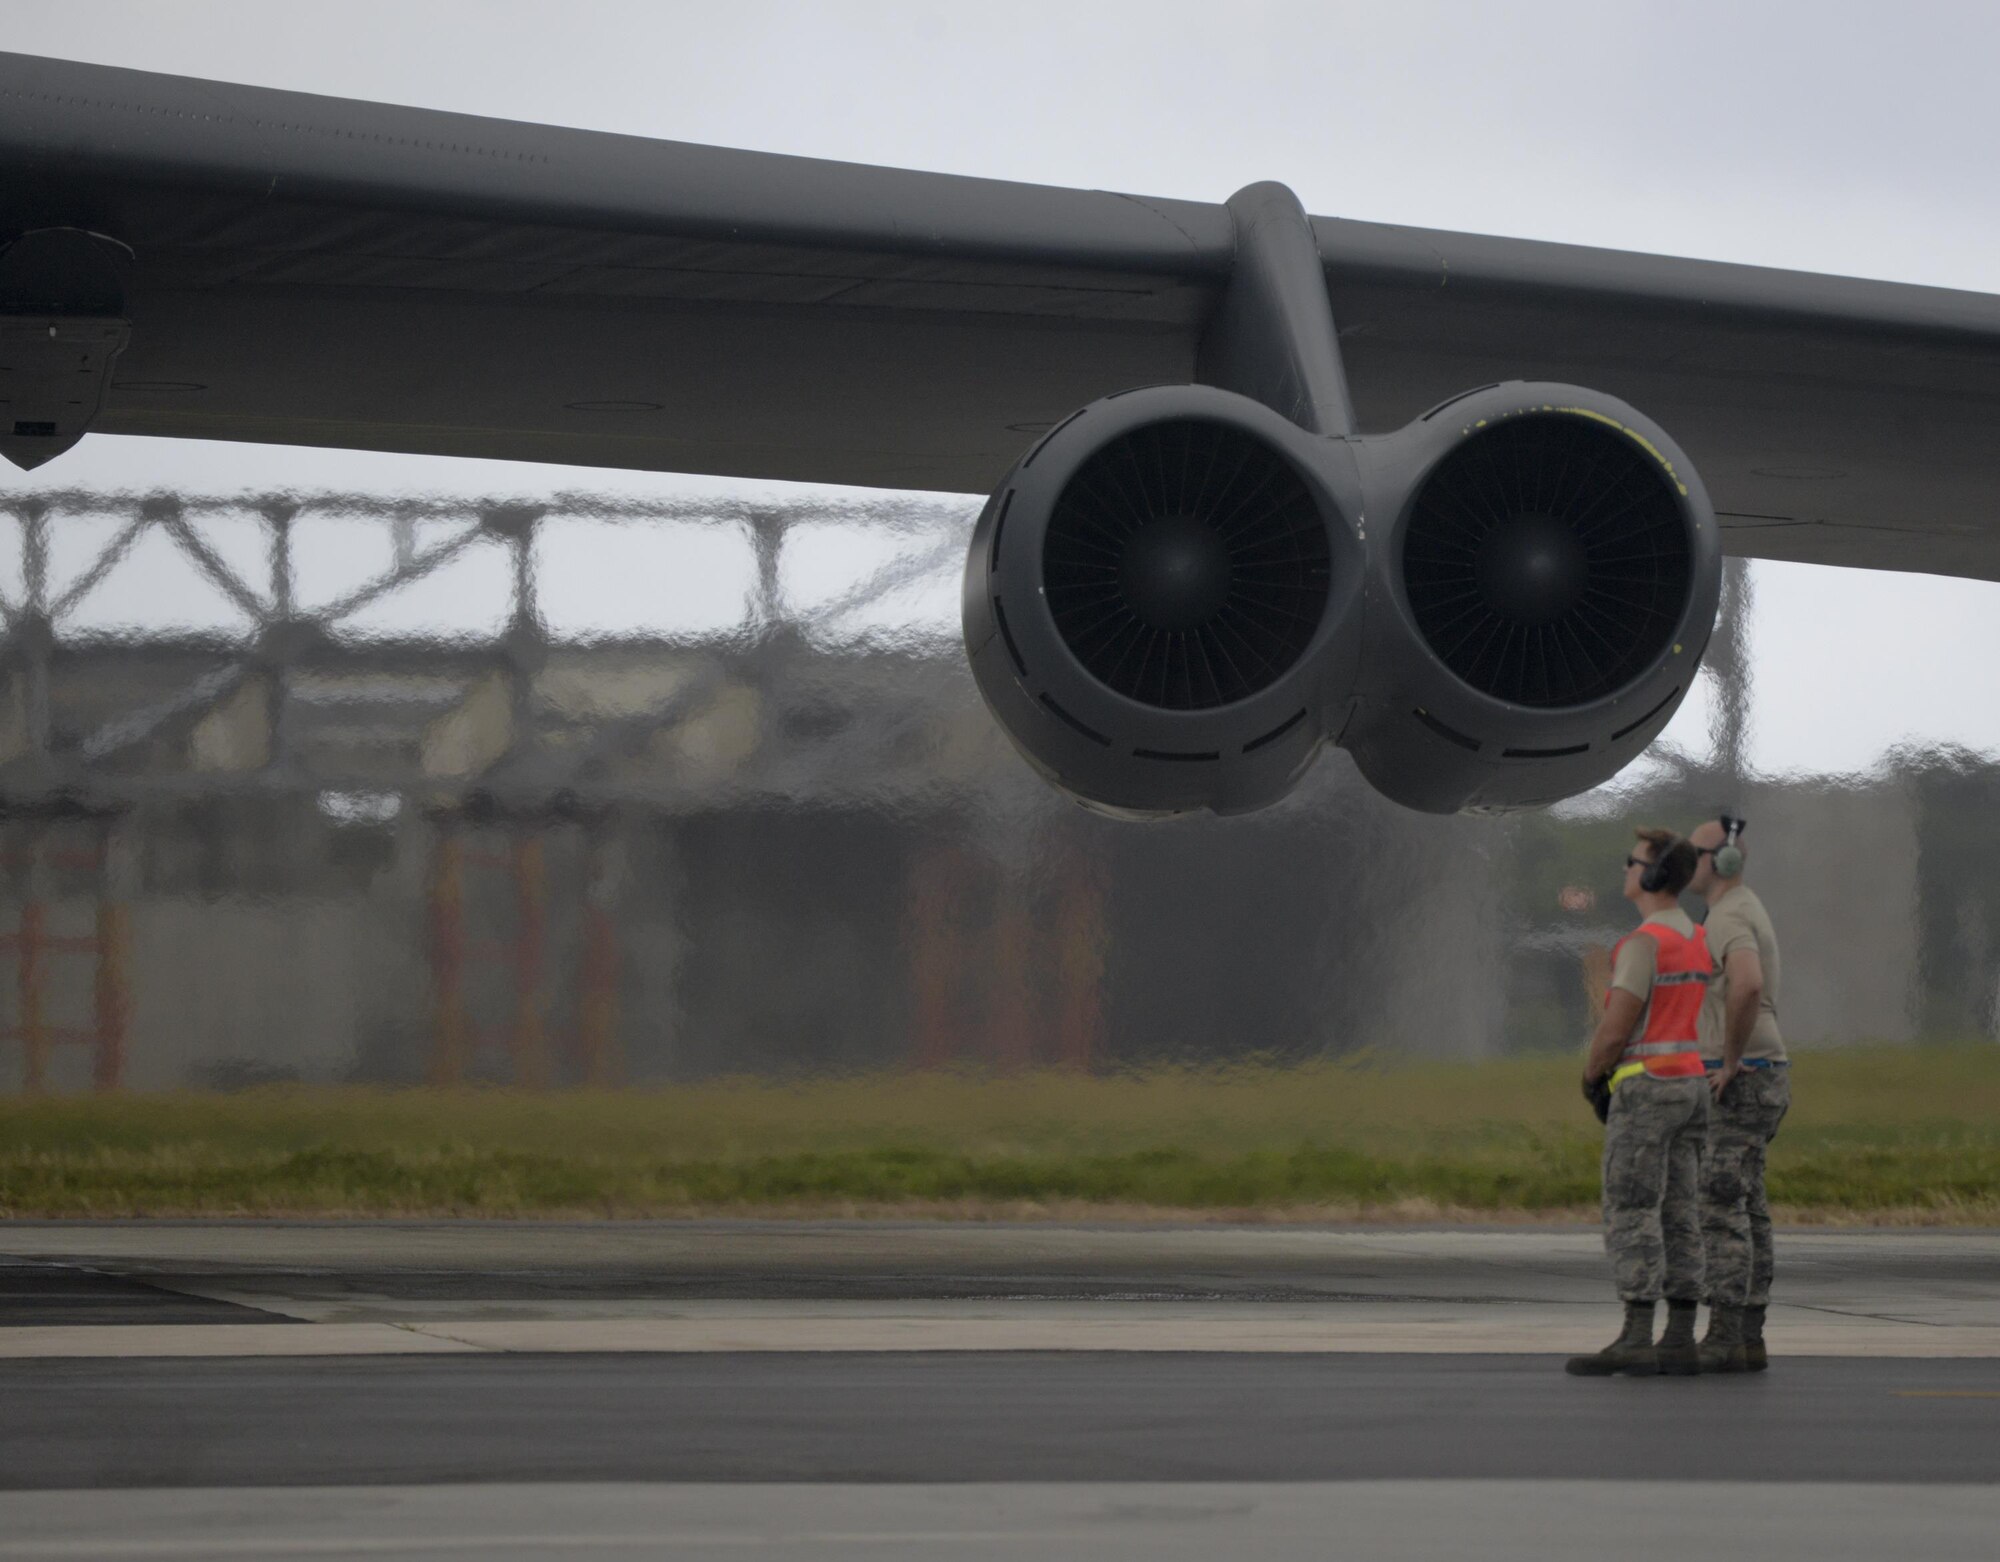 U.S. Airmen deployed from Minot Air Force Base, North Dakota, inspect a B-52 Stratofortress engine during takeoff preparations on Andersen Air Force Base, Guam, Dec. 17, 2016. U.S. Air Force bombers deploy routinely to support ongoing operations in the  Indo-Asia-Pacific region.  (U.S. Air Force photo by Staff Sgt. Benjamin Gonsier/Released)  